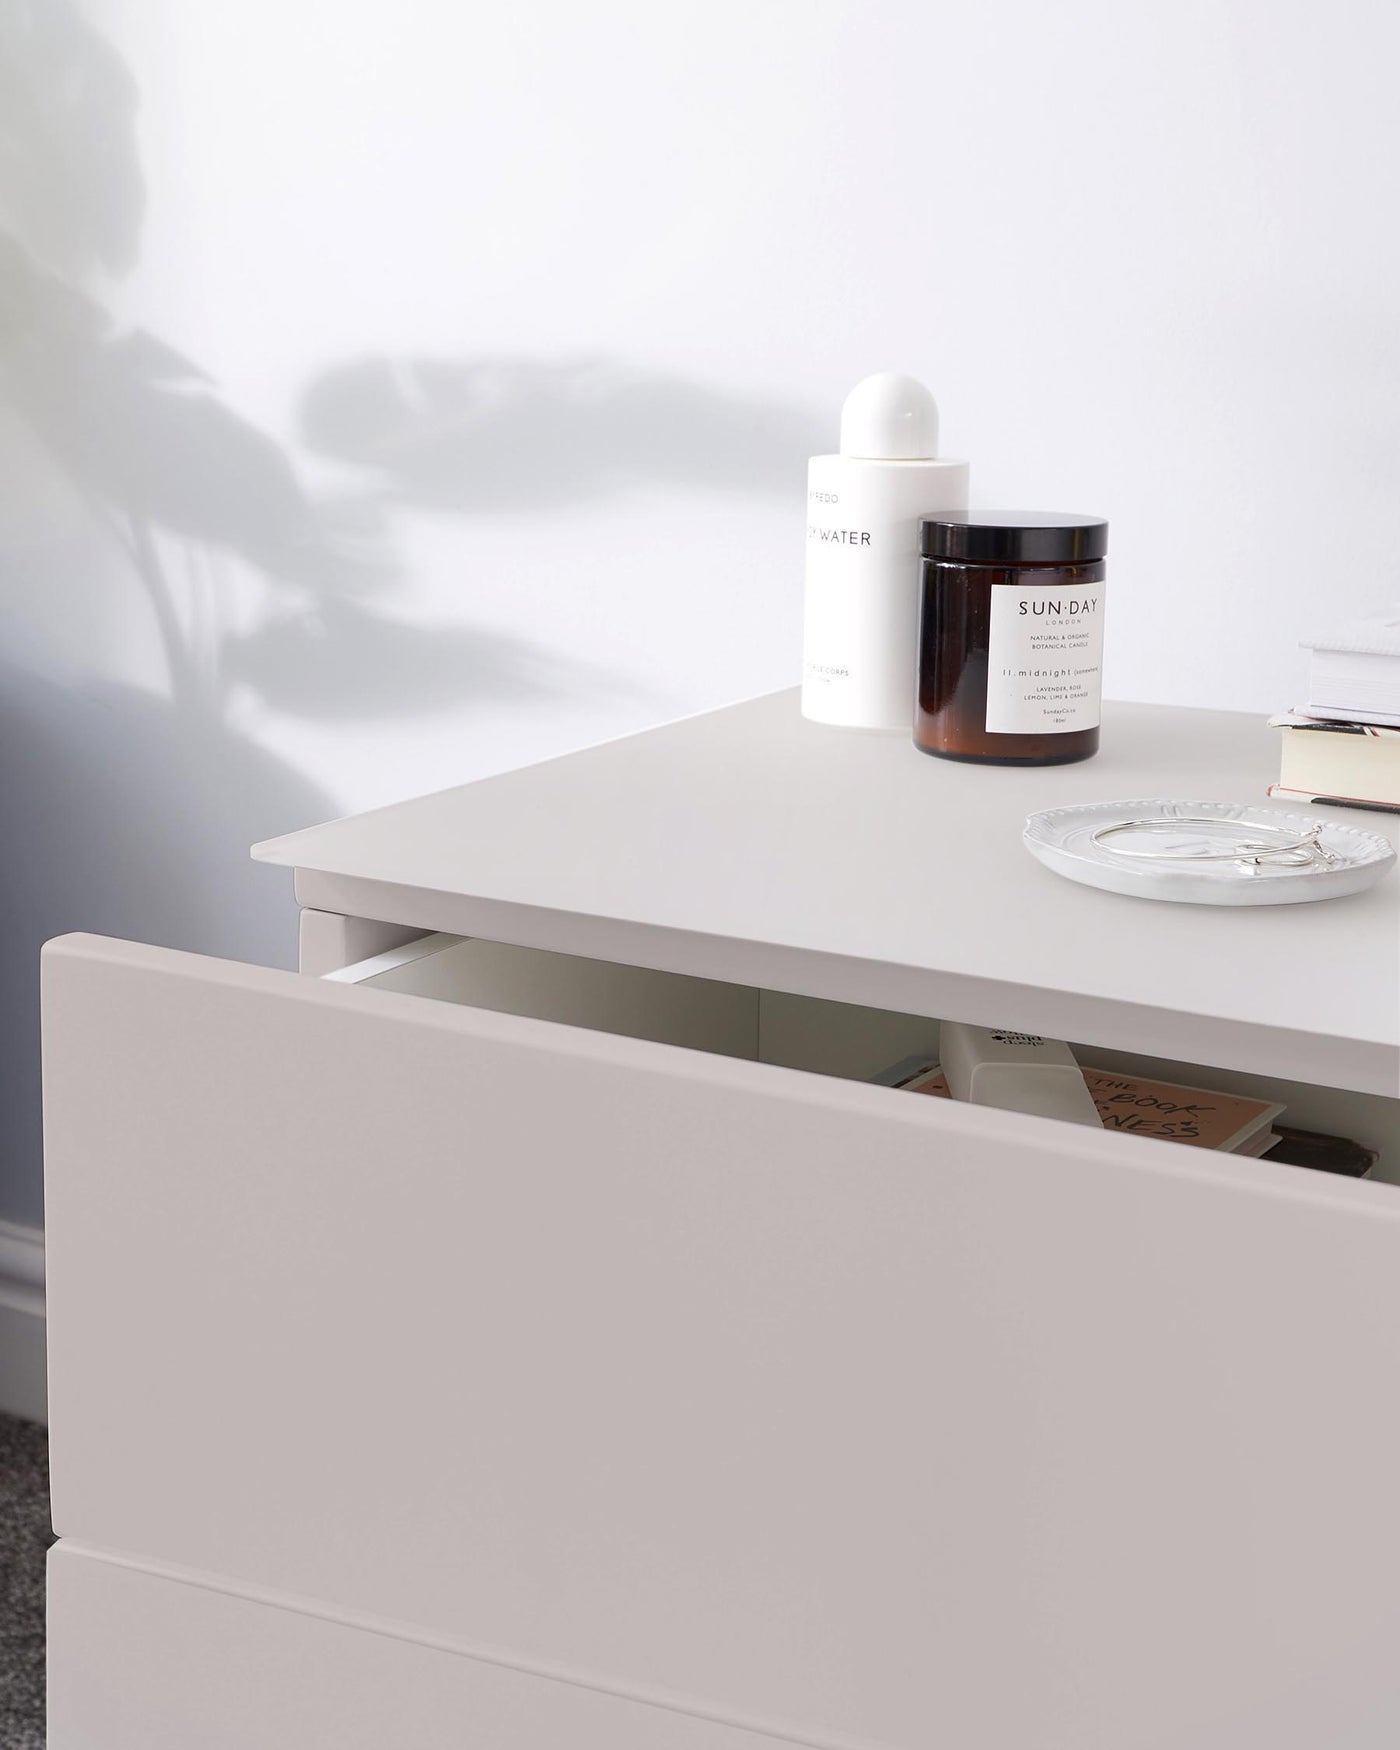 Modern minimalist white side table with a drawer partially open revealing books inside, along with a shelf holding various decorative items on the tabletop.